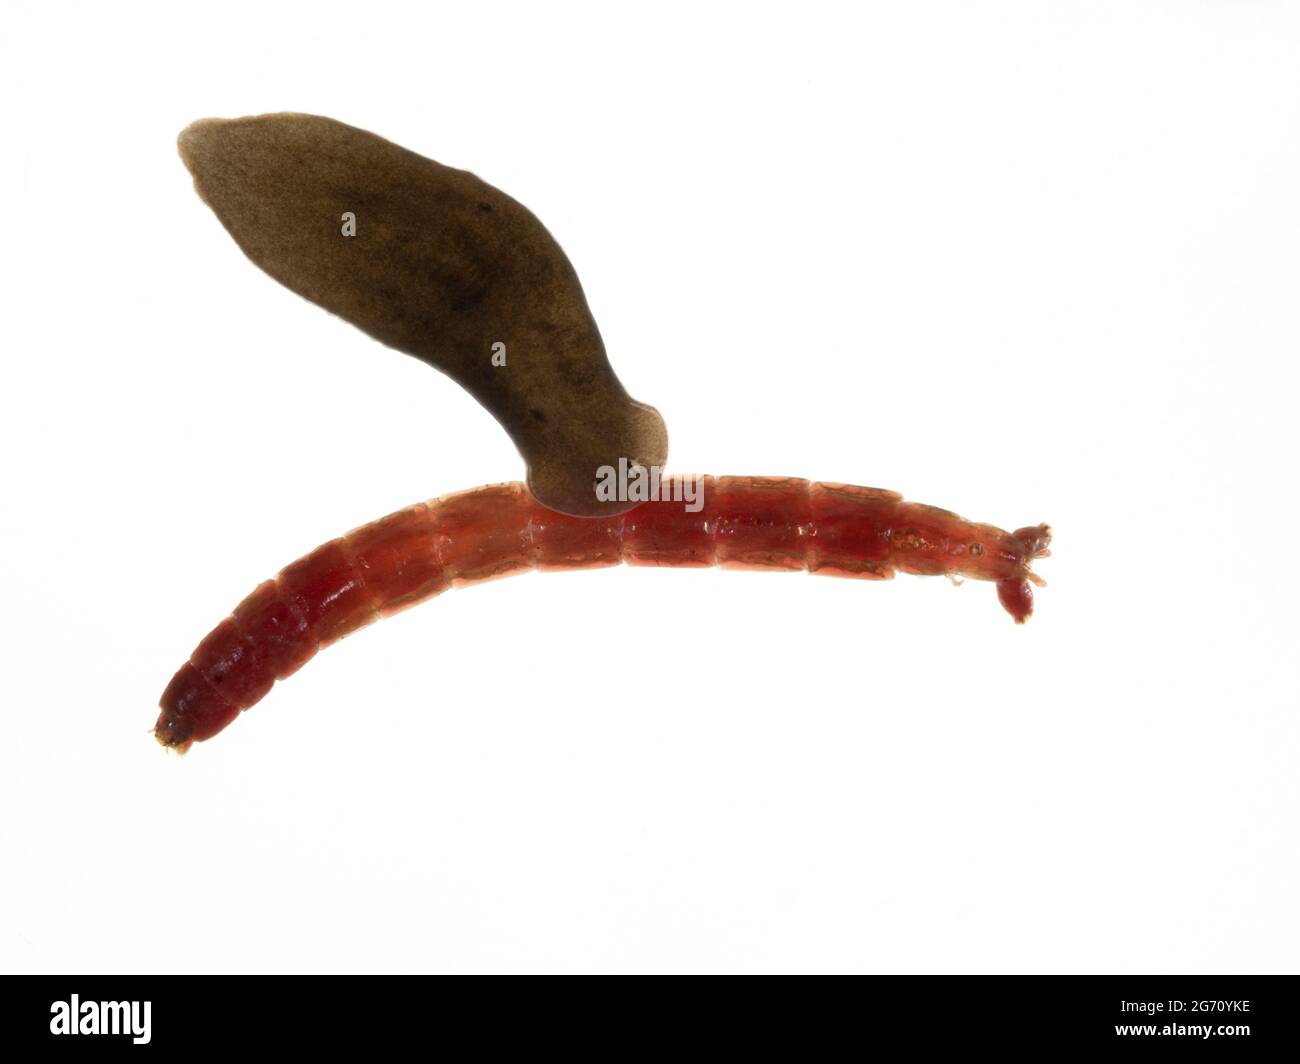 a freshwater triclad flatworm (planarian) (Schmidtea polychroa) approaching a dead bloodworm (chironomid midge larva) as a possible source of food Stock Photo